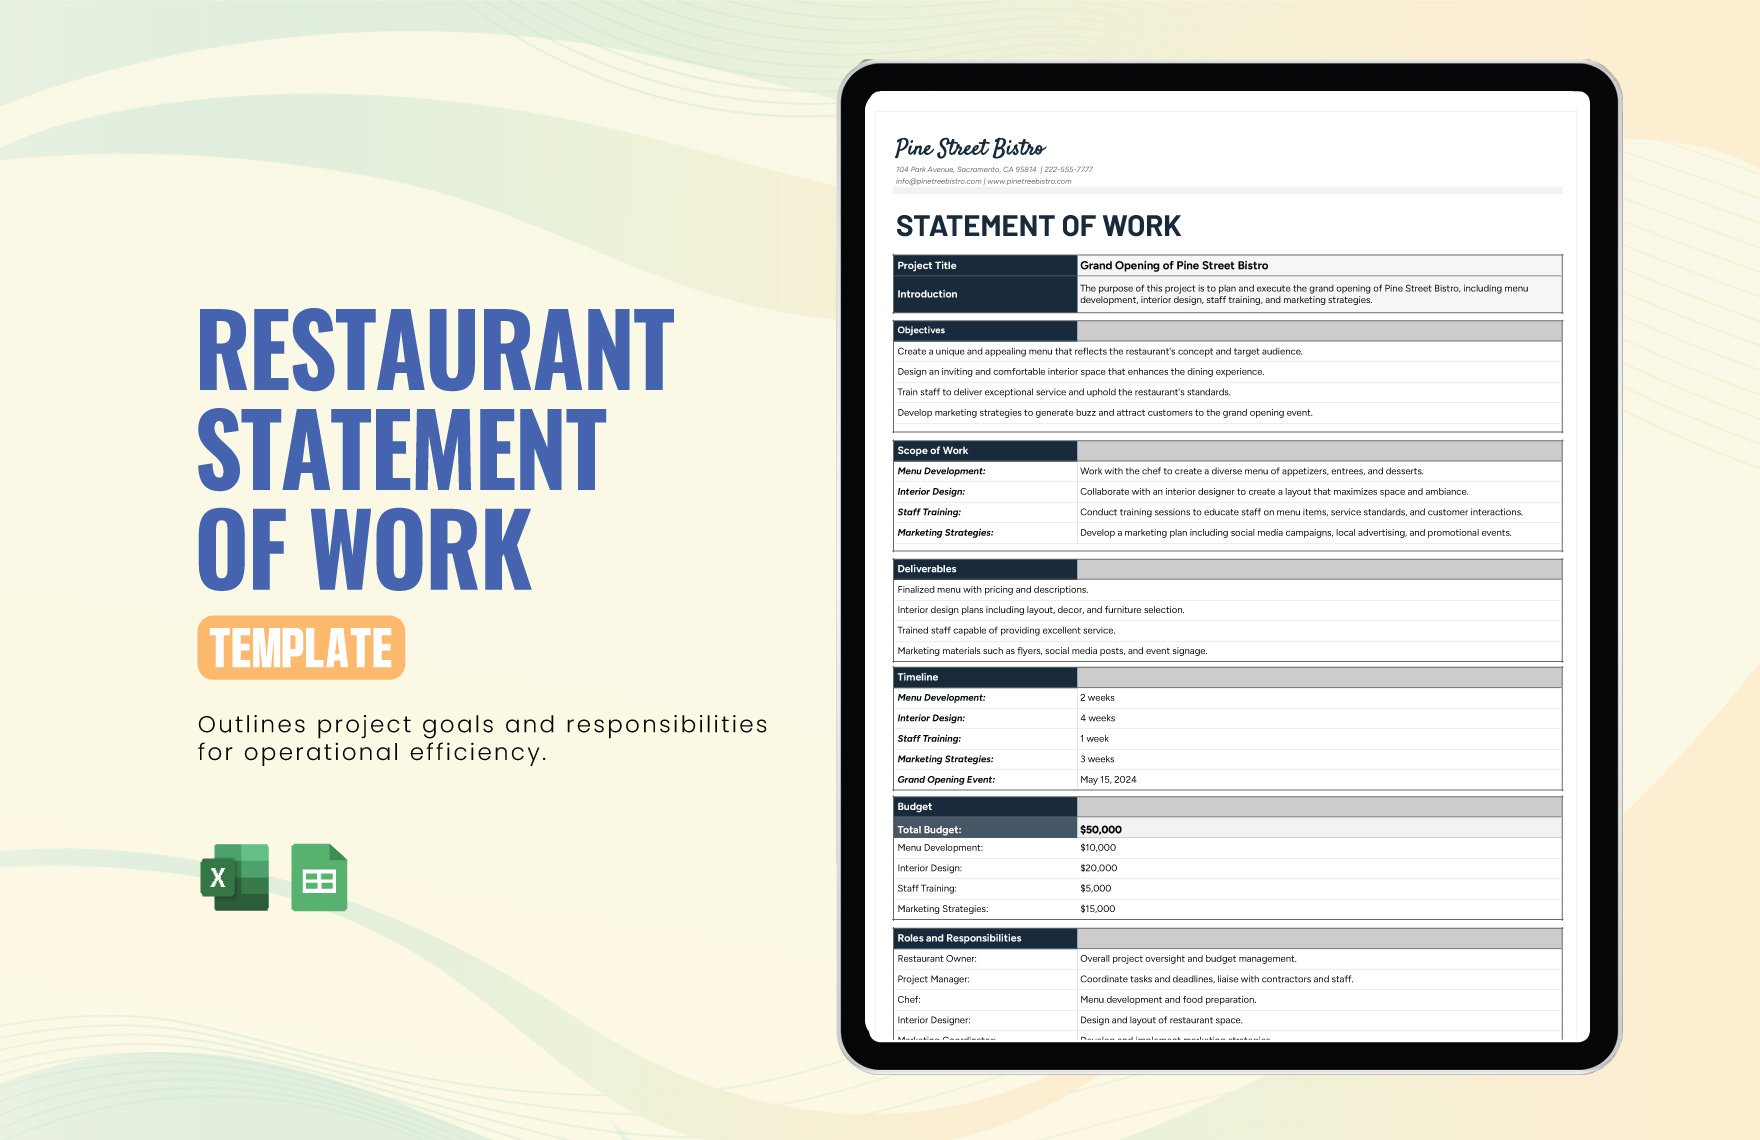 Restaurant Statement of Work Template in Excel, Google Sheets